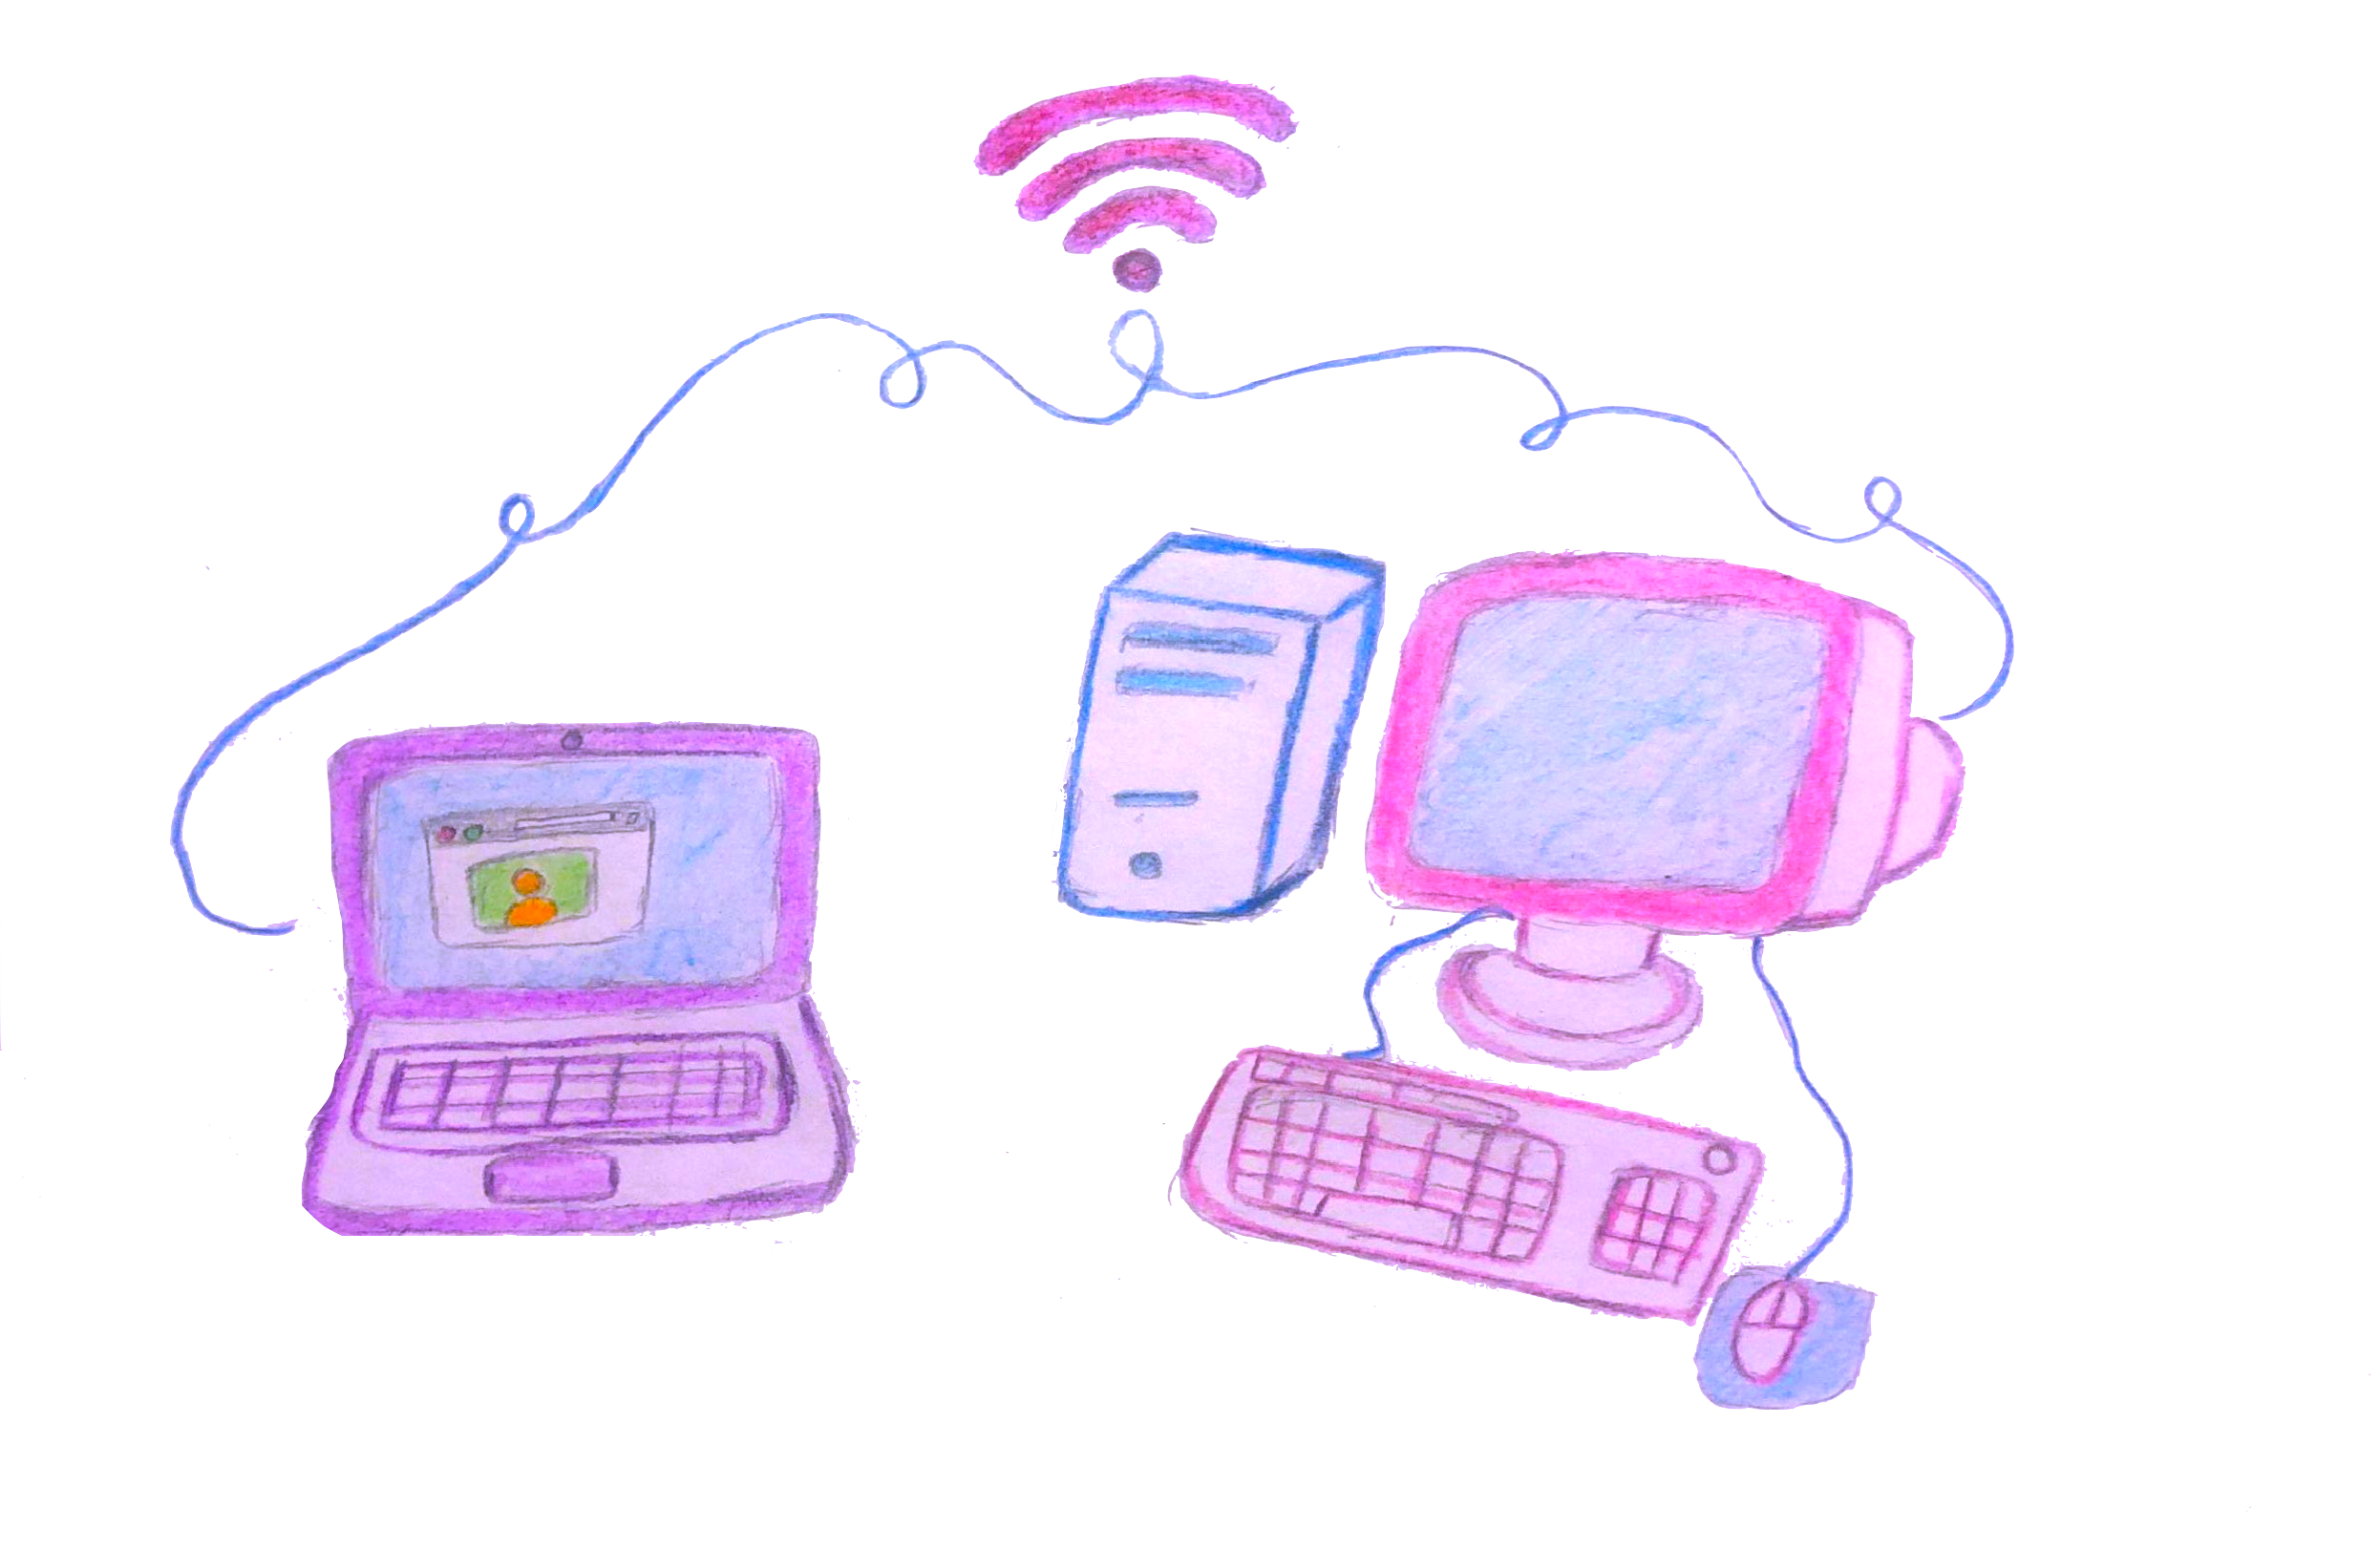 Cartoon repesenting networked devices